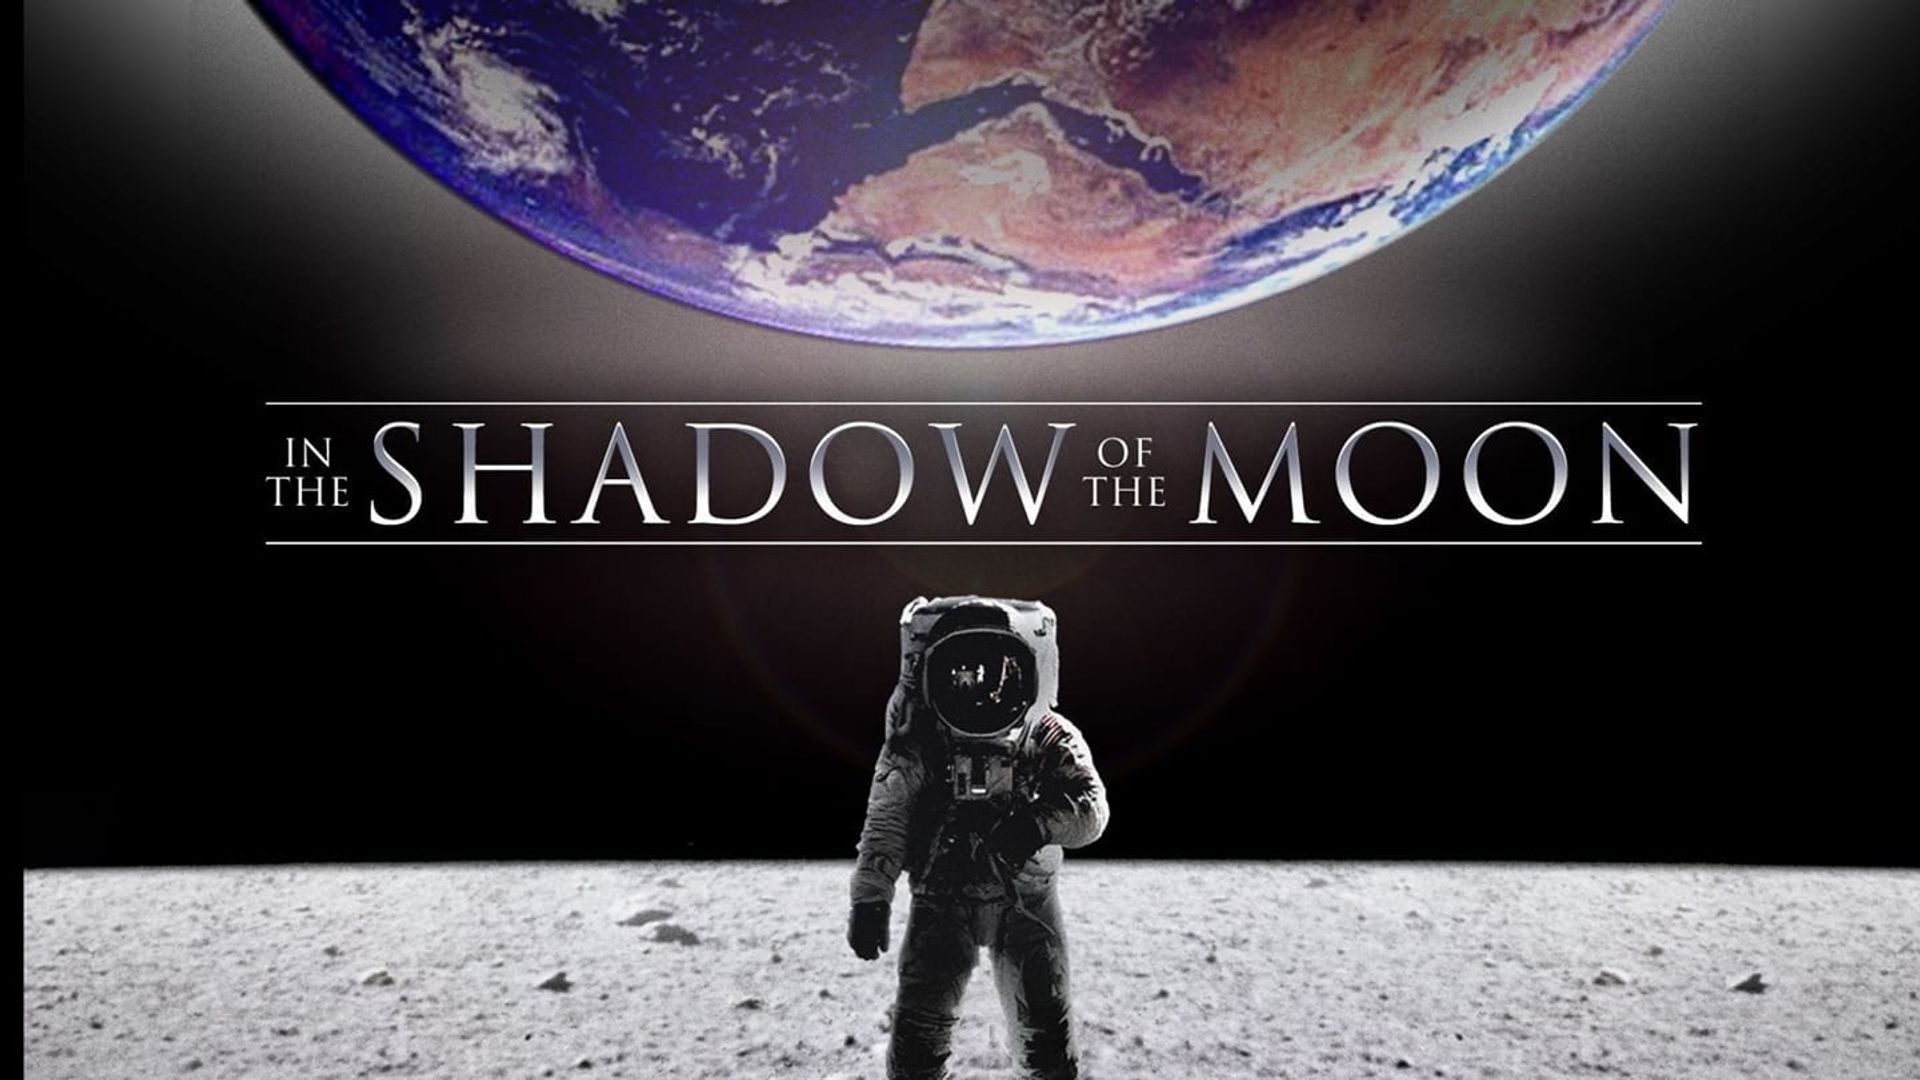 42 Facts about the movie In the Shadow of the Moon - Facts.net